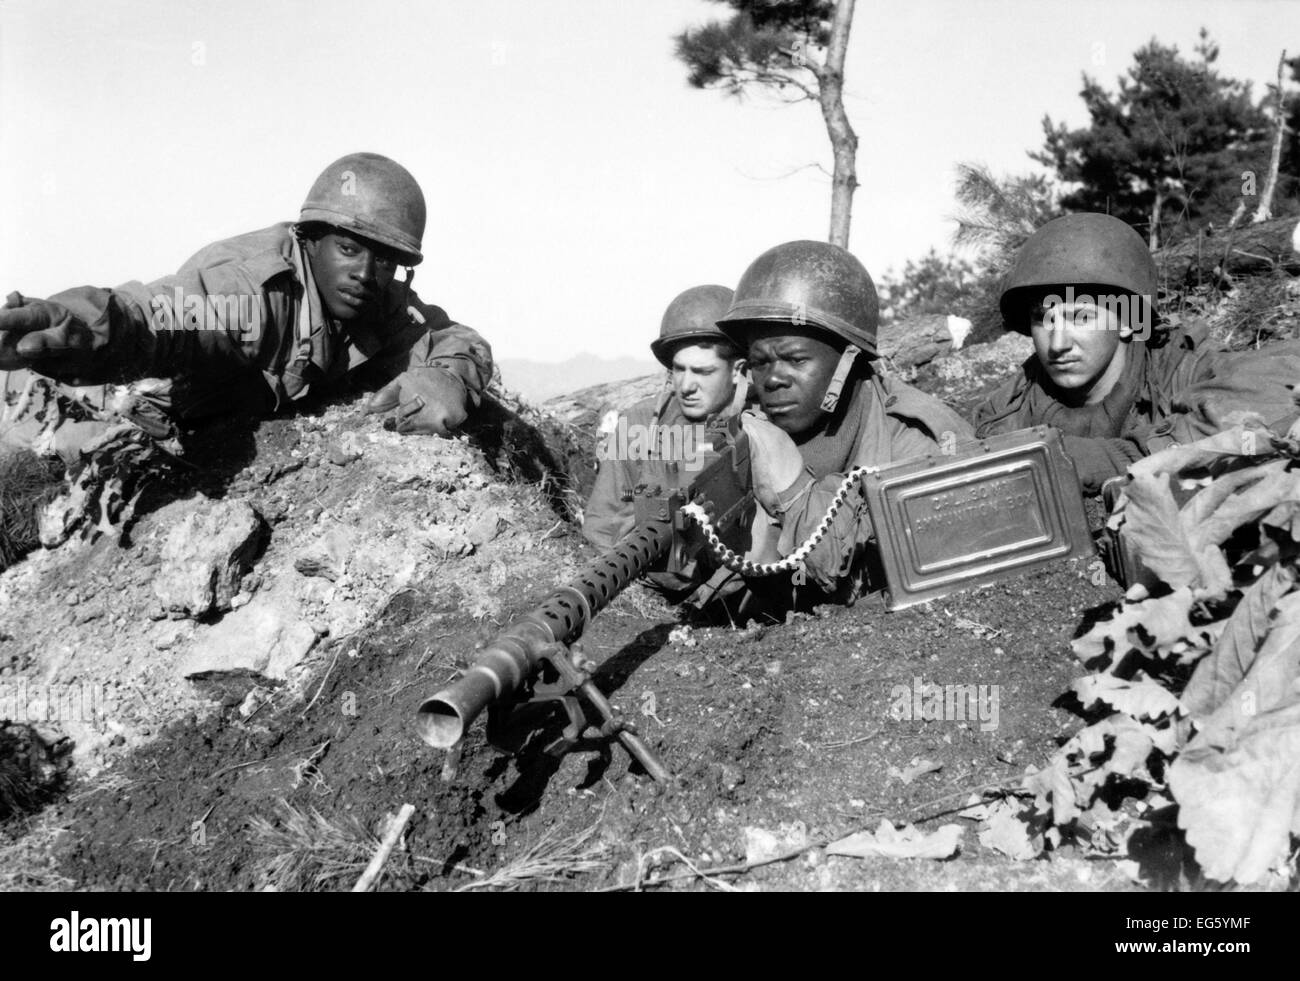 KOREAN WAR (1950-1953) Fighting with the 2nd Inf. Div. north of the Chongchon River, Sfc. Major Cleveland, weapons squad leader, points out communist-led North Korean position to his machine gun crew.  November 20, 1950.  Photo :. James Cox, US Army NARA FILE #:  111-SC-353469 WAR & CONFLICT BOOK #:  1426 Stock Photo